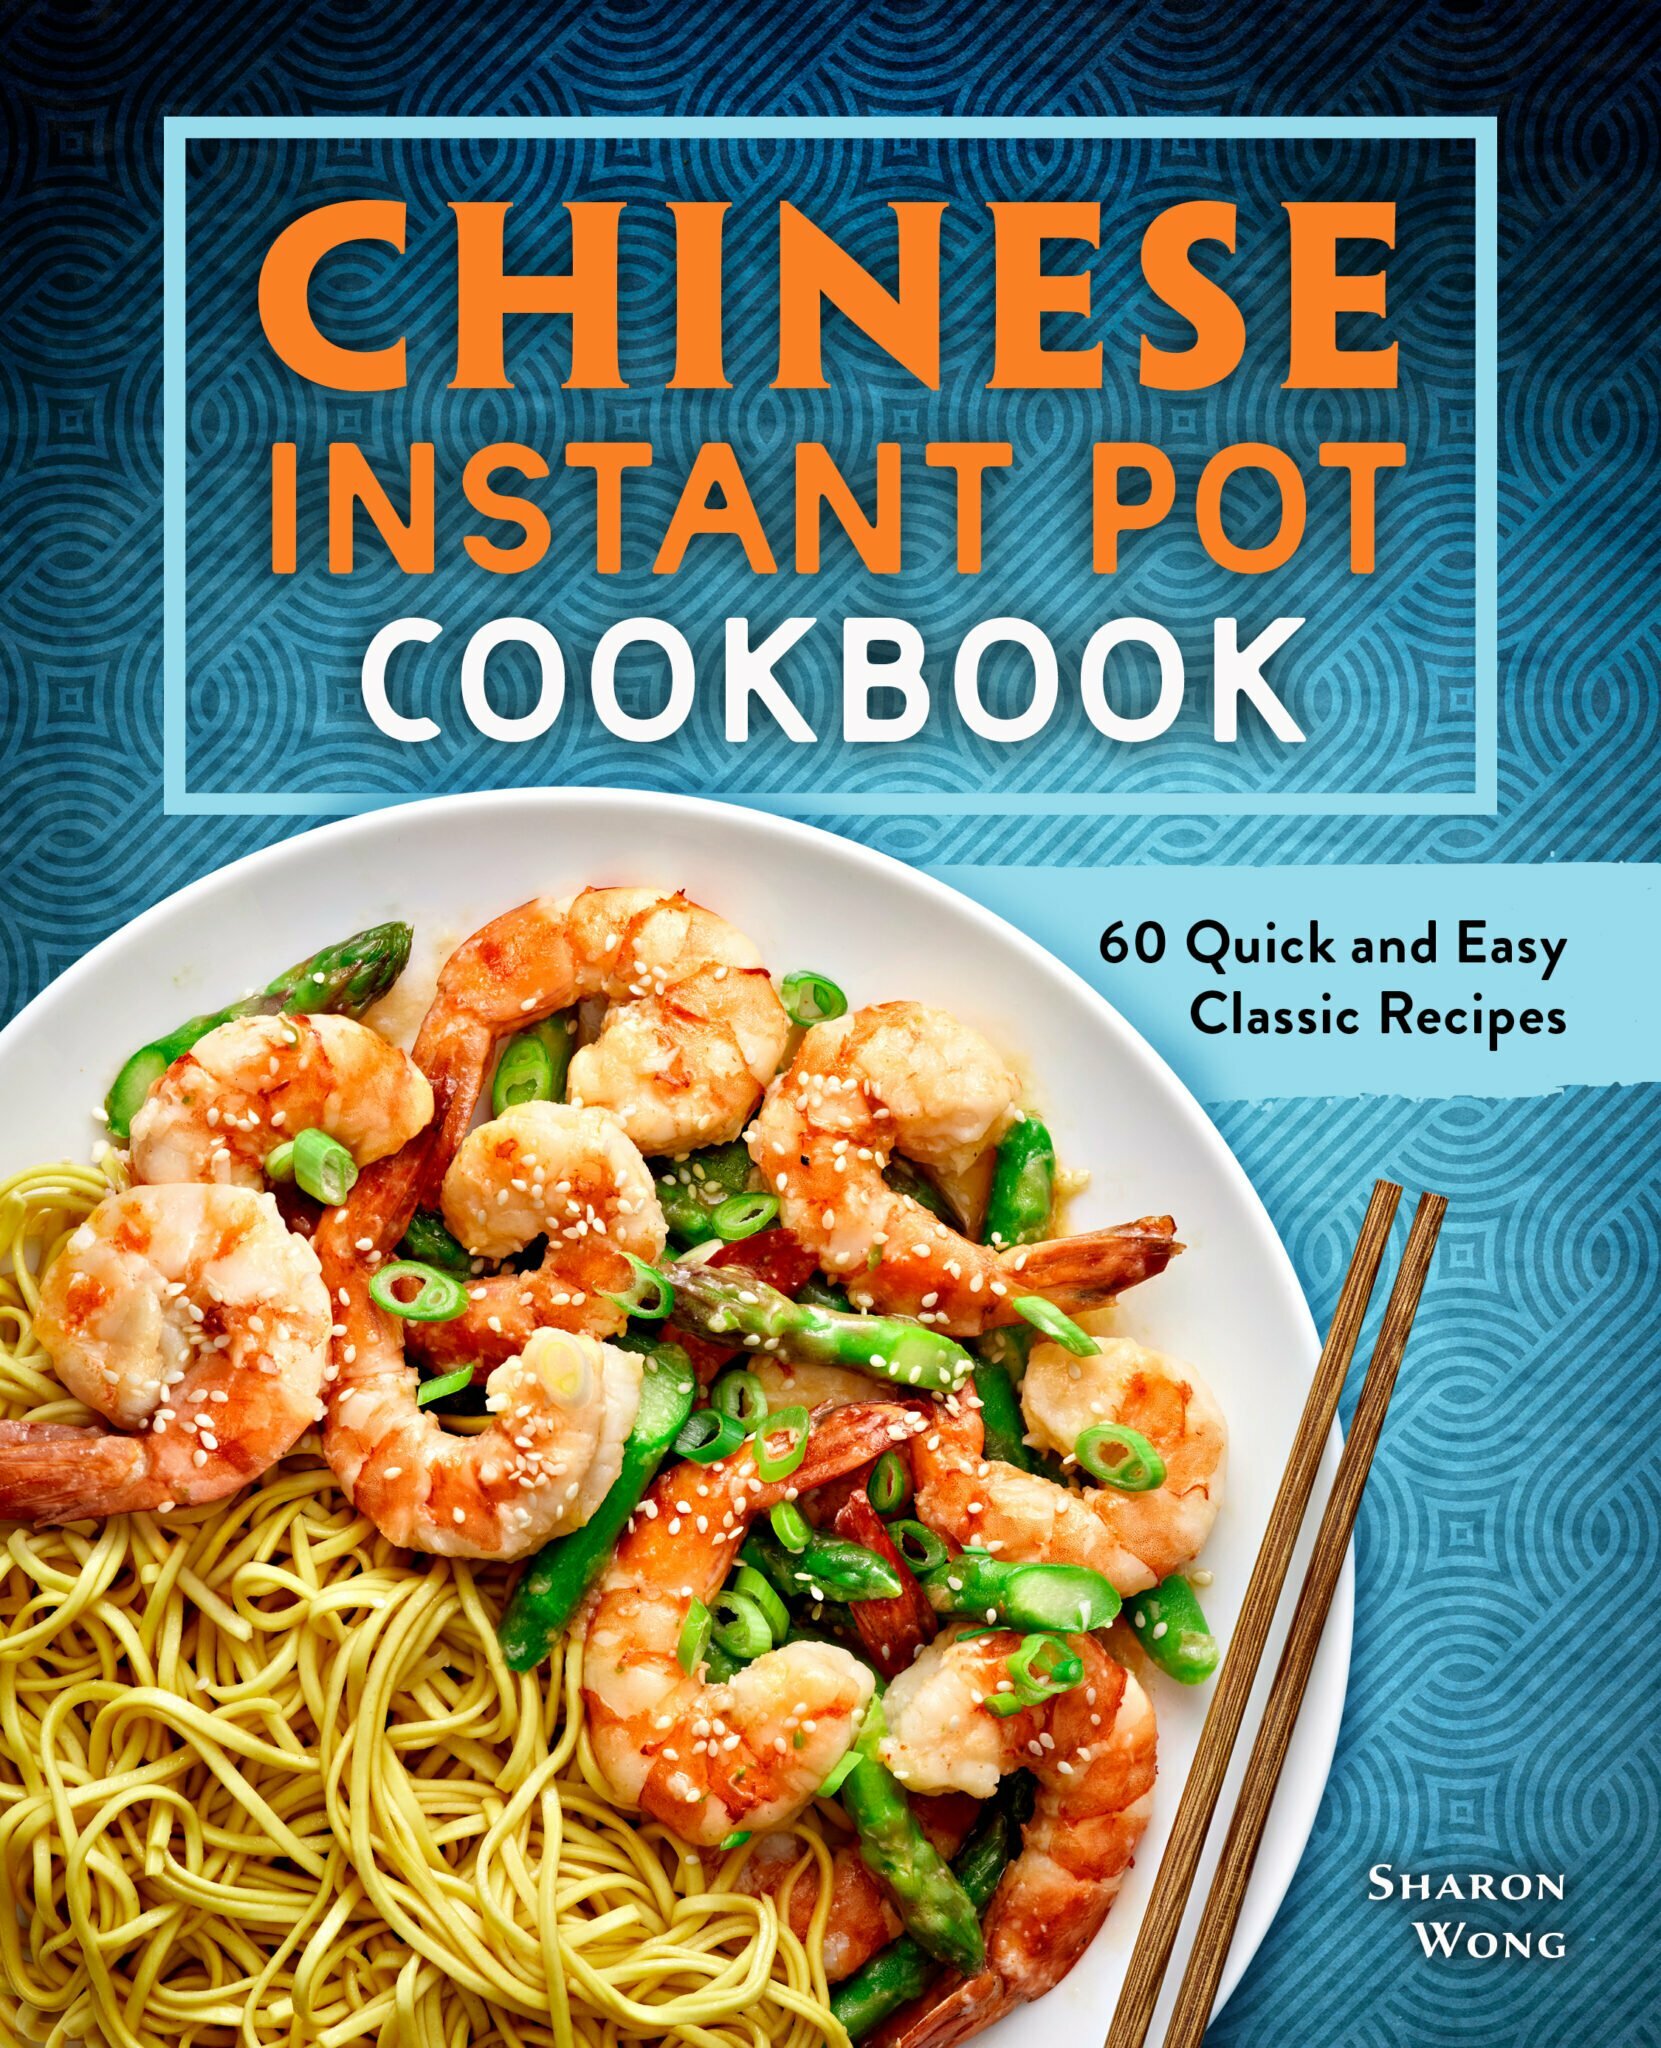 https://nutfreewok.com/wp-content/uploads/2022/01/Chinese-Instant-Pot-cookbook-cover-scaled.jpeg